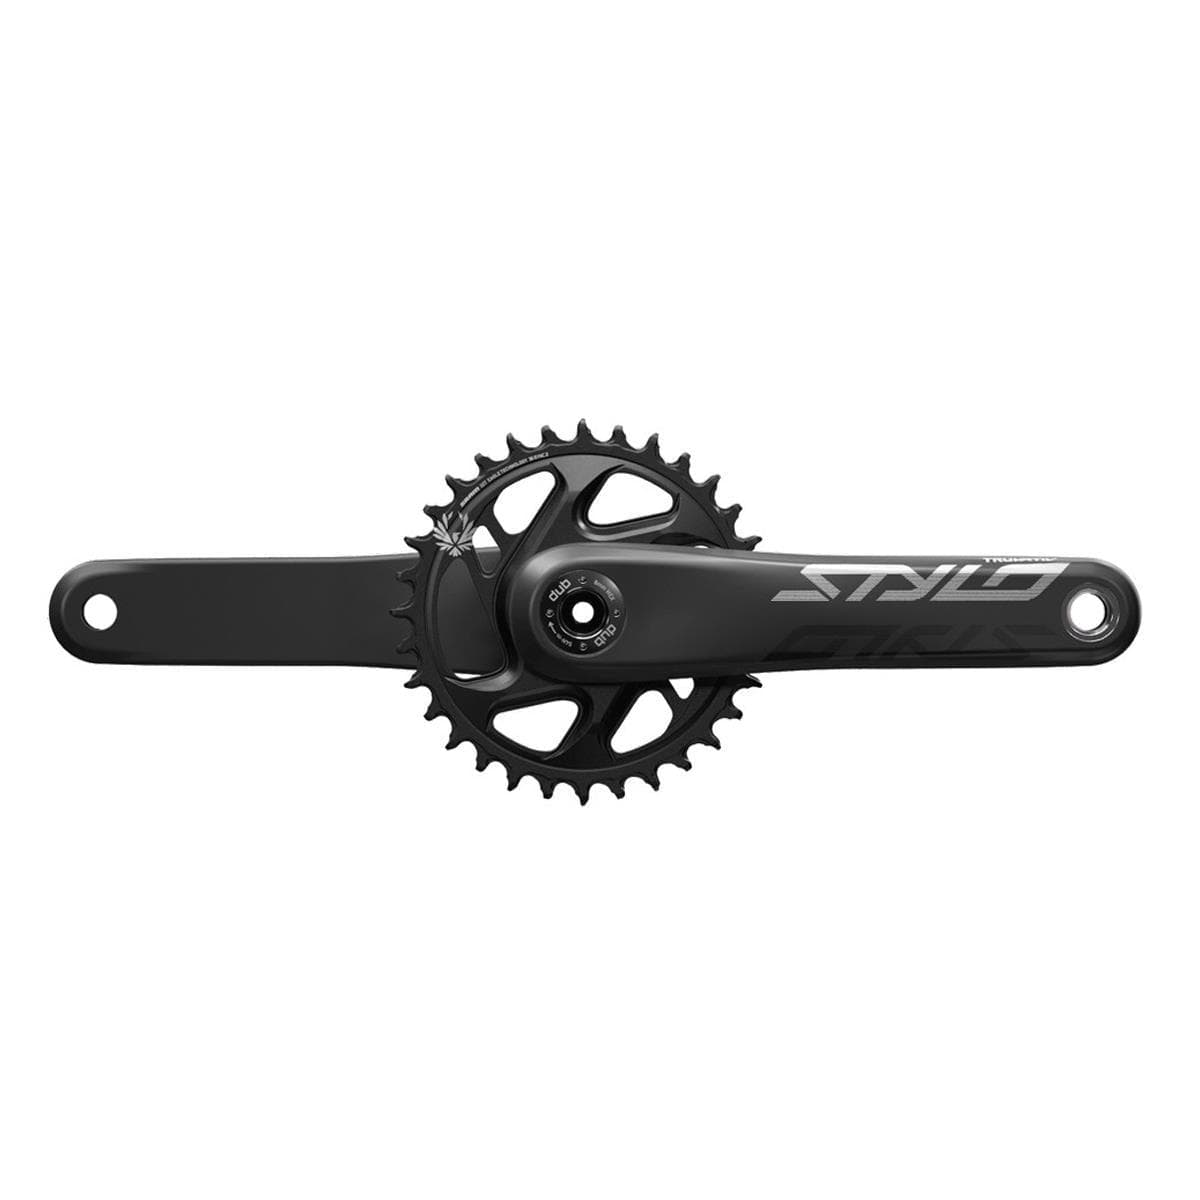 Truvativ Crank Stylo Carbon Eagle Dub 12S 175 W Direct Mount32T X-Sync 2 Chainring Black (Dub Cups/Bearings Not Included): Black 175Mm